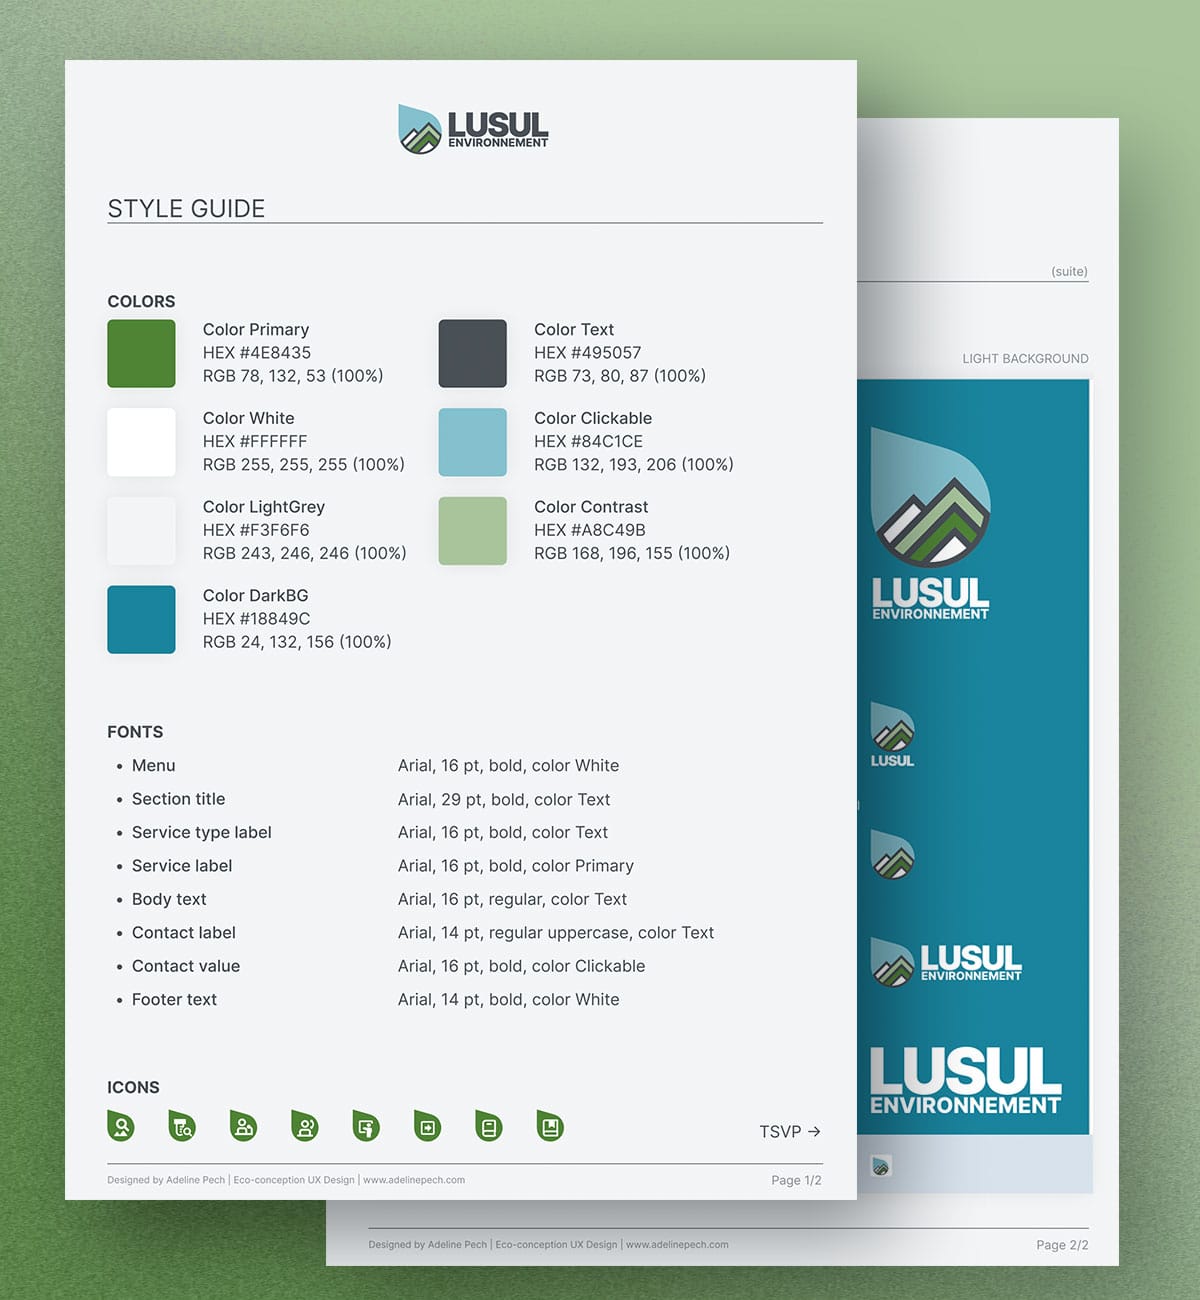 Style guide Lusul Environment